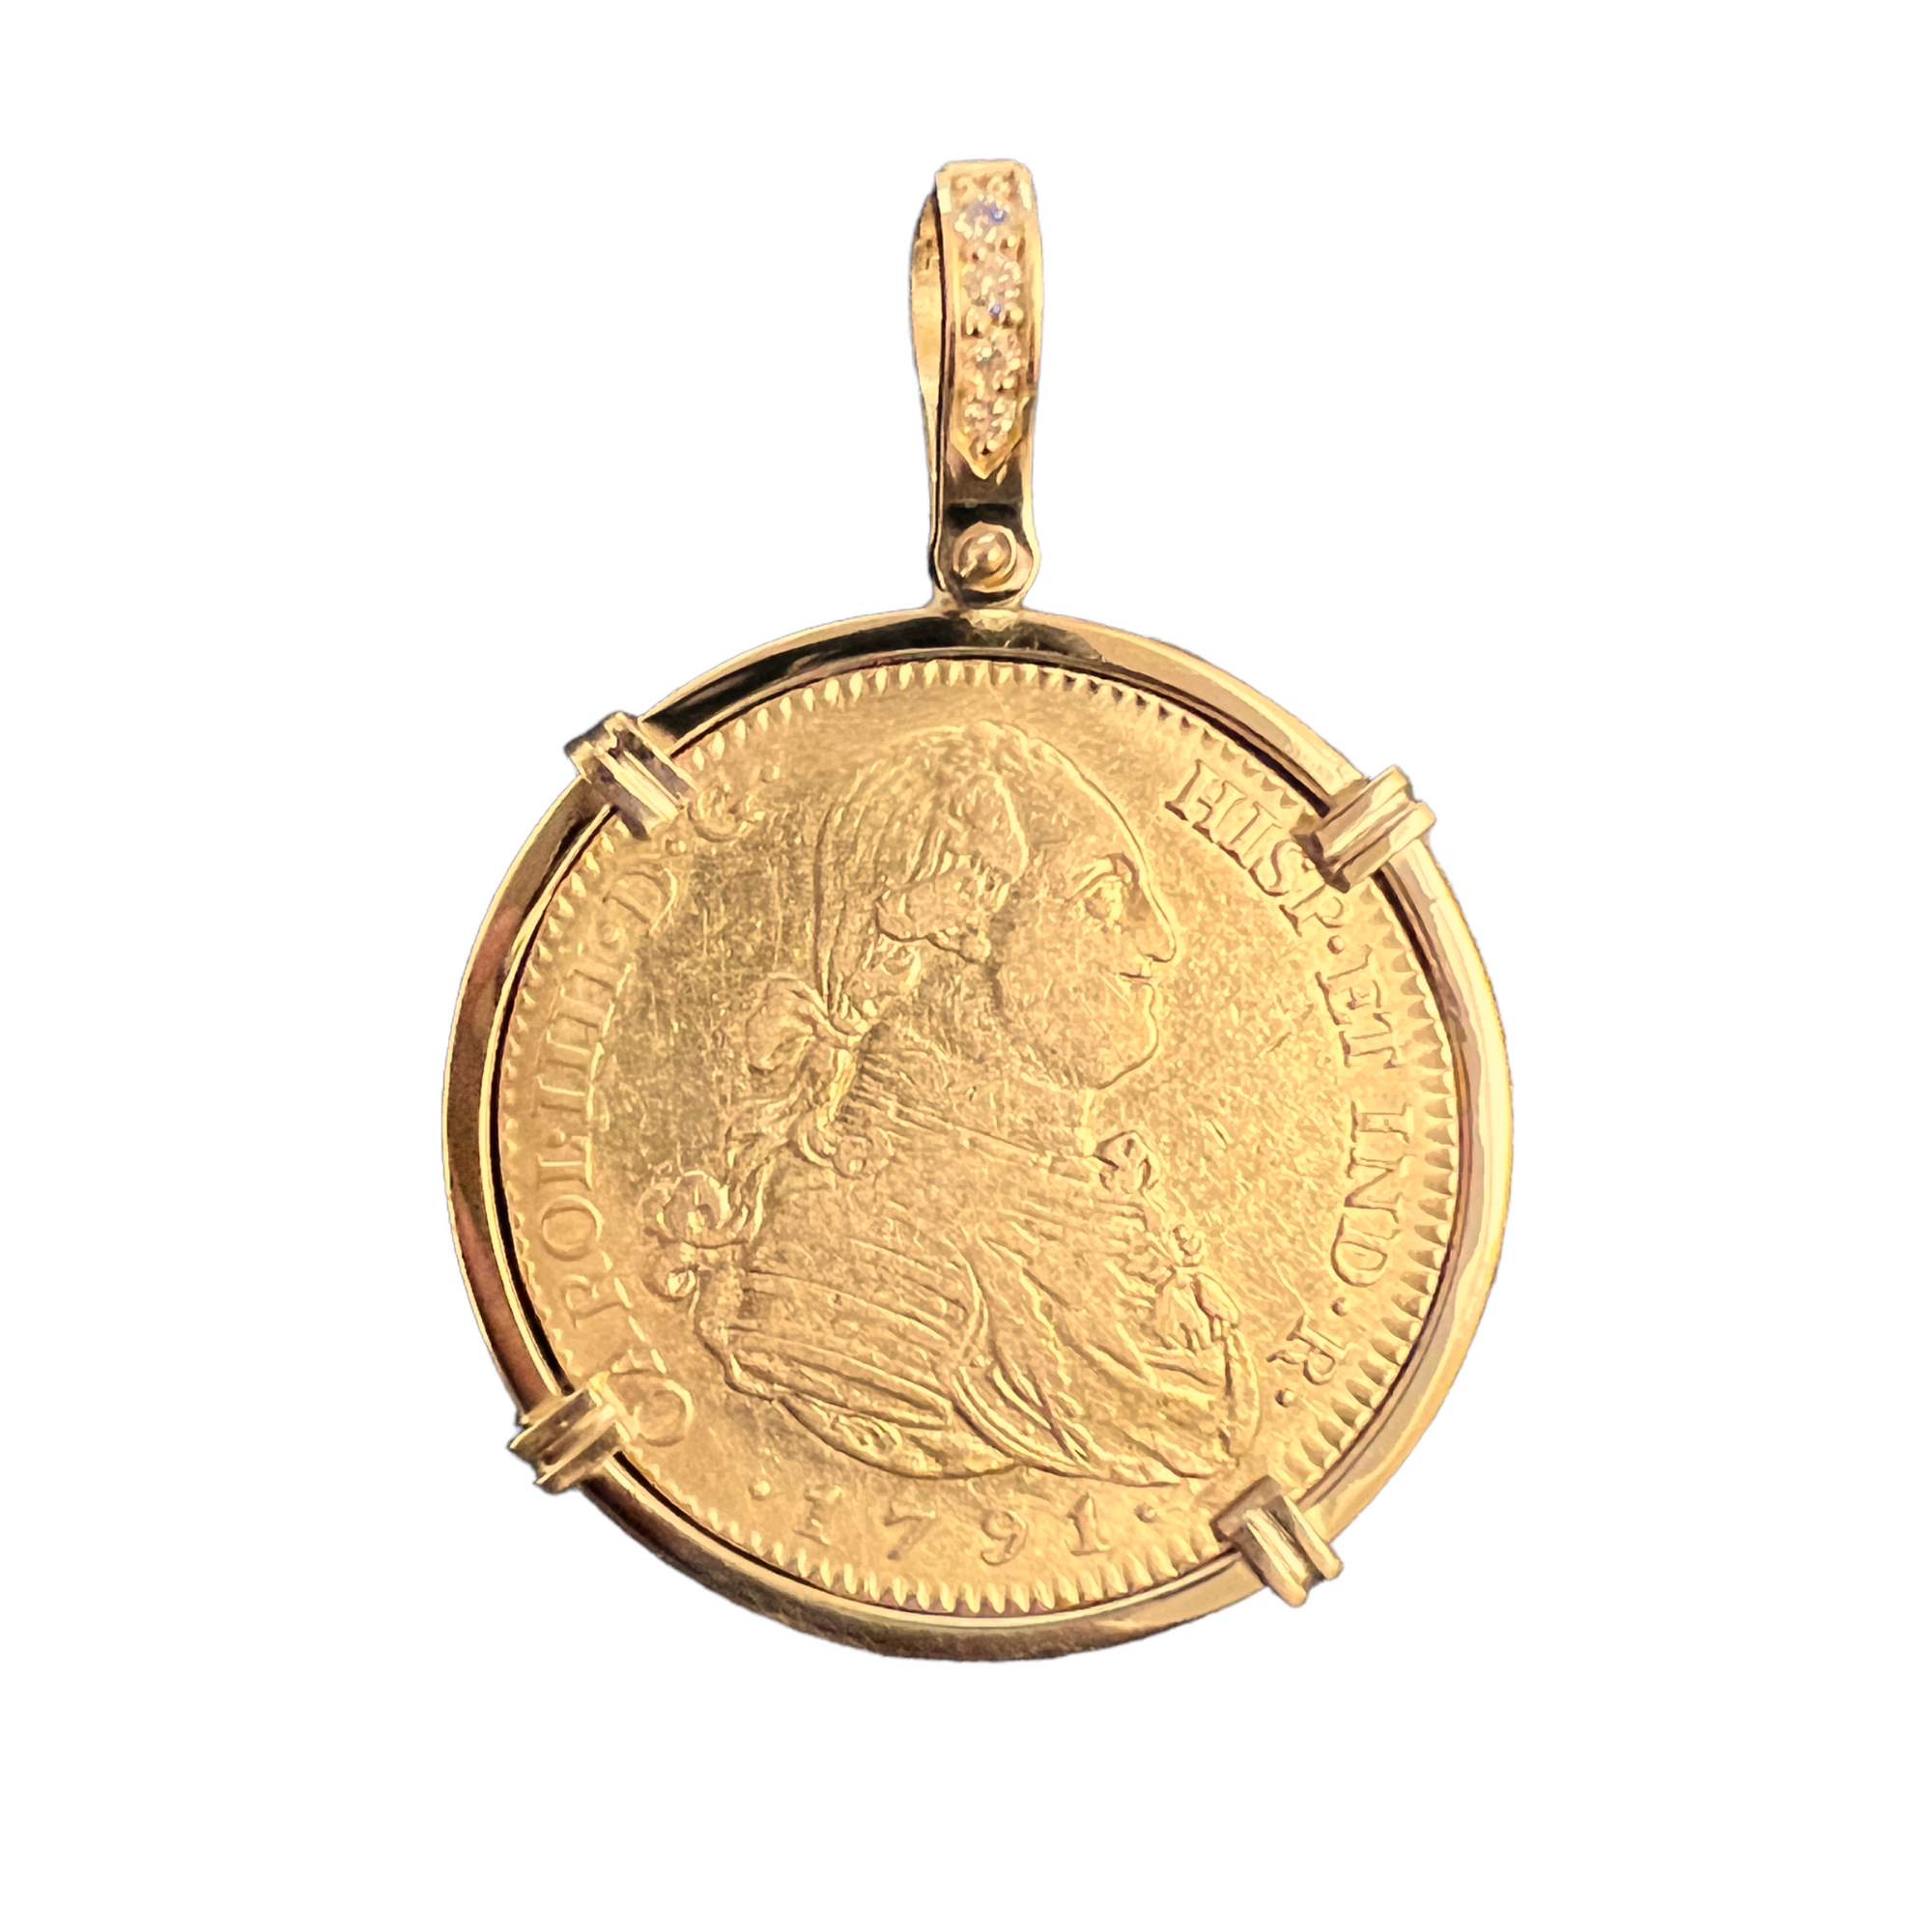 Private collection - Spanish 4 Escudos - Dated: 1791 from the Reign of Charles IV.  Mounted in 18K gold with diamond accents.